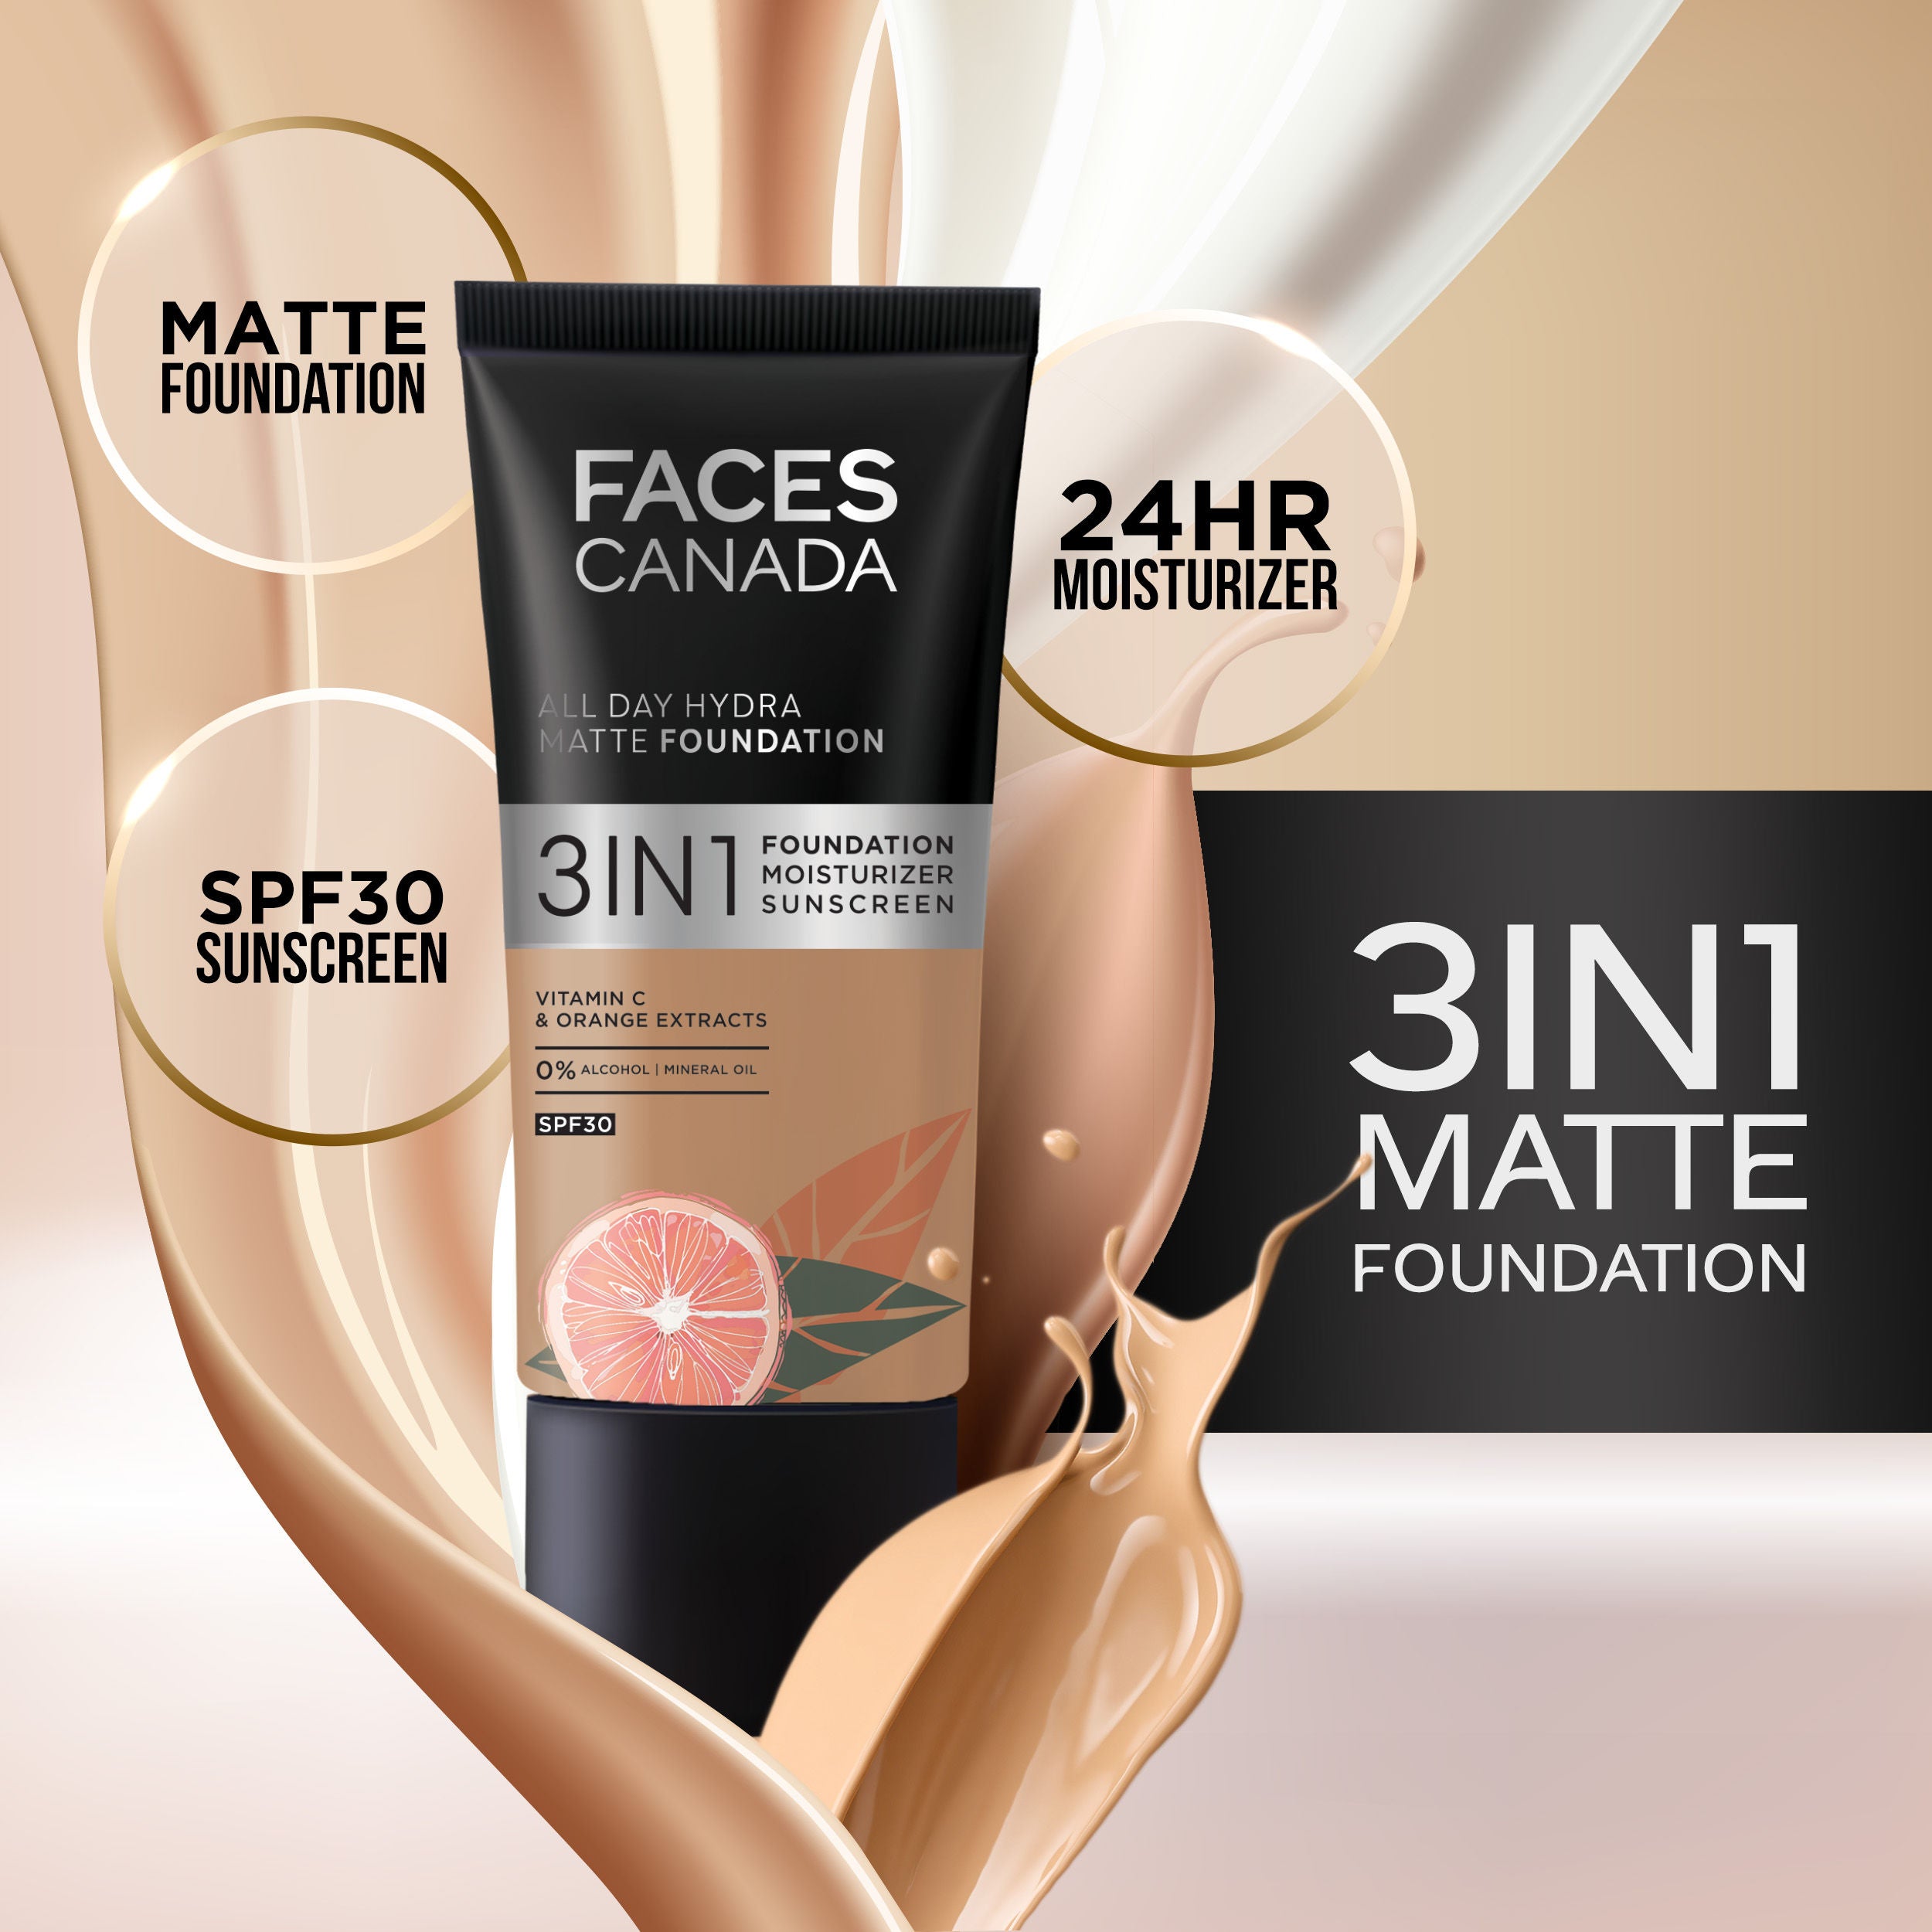 Faces Canada 3 In 1 All Day Hydra Matte Foundation - Golden Beige 032 (25ml) Faces Canada